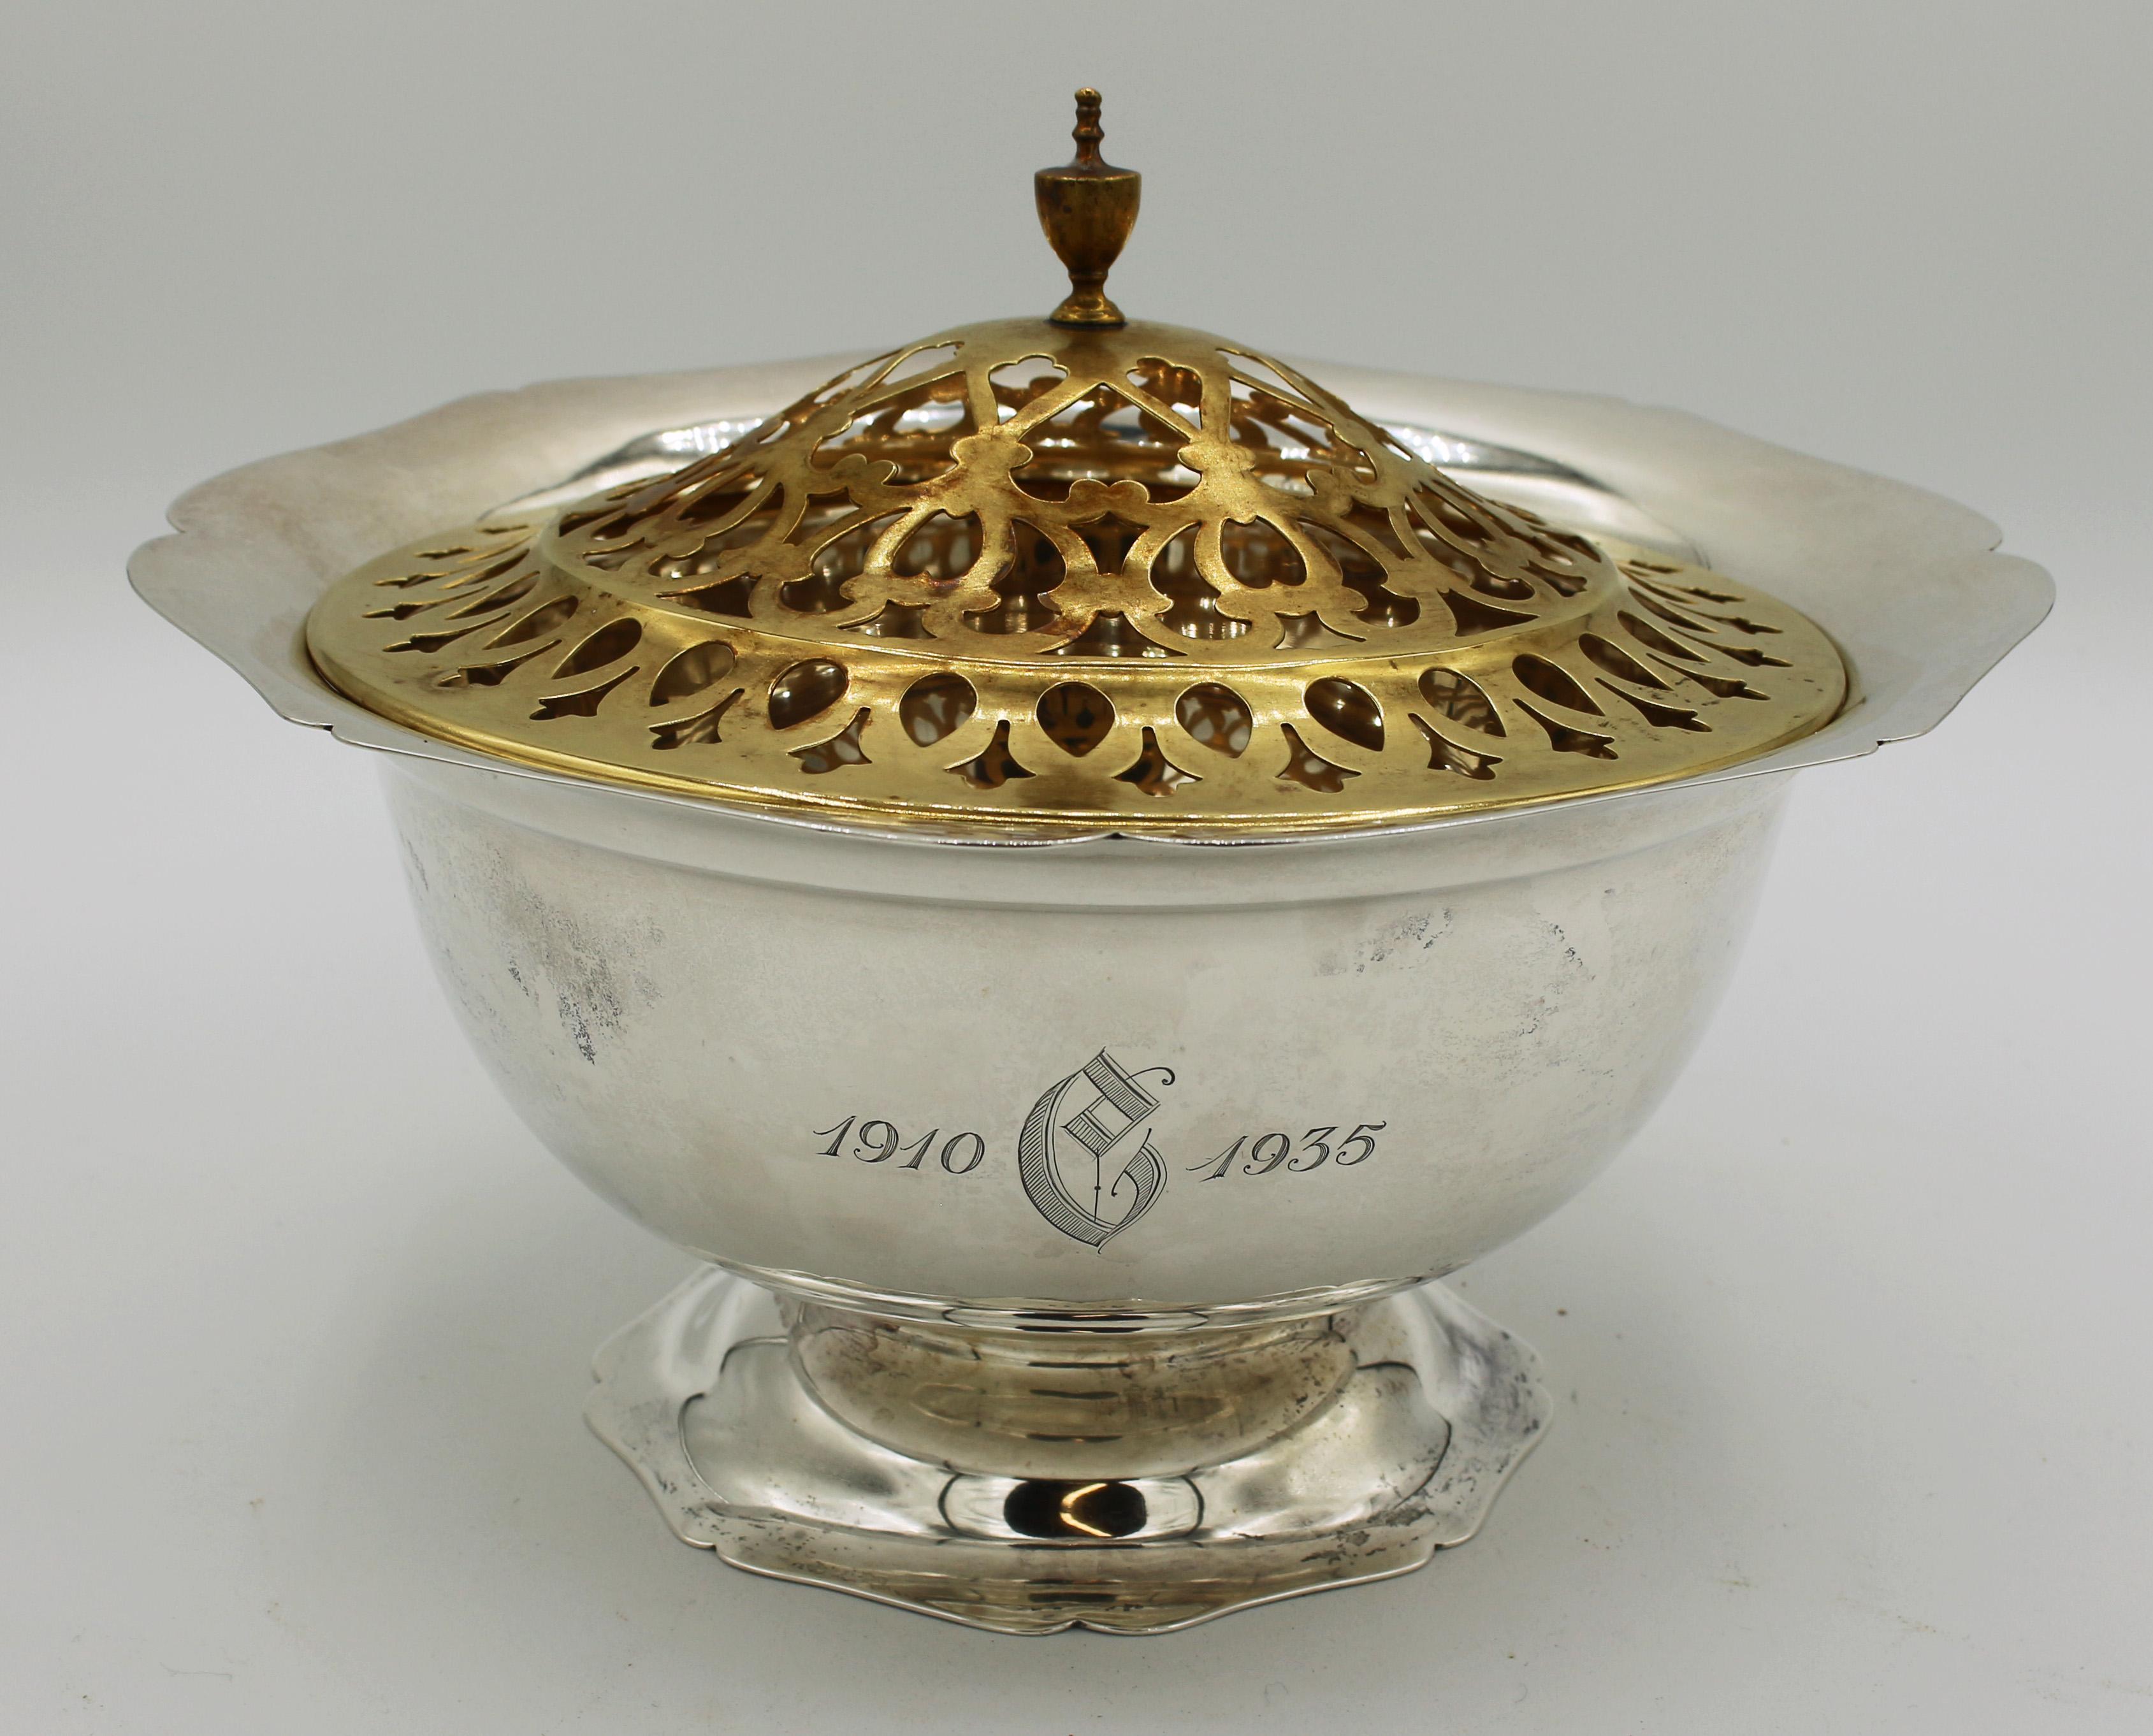 Alvin Art Deco lobed sterling bowl with 1935 engraved panel. Together with a gilt metal potpourri cover. The cover doubles for floral arrangements if combined with a heavy glass or metal frog (not included). 25.40 troy oz. Measures: 10